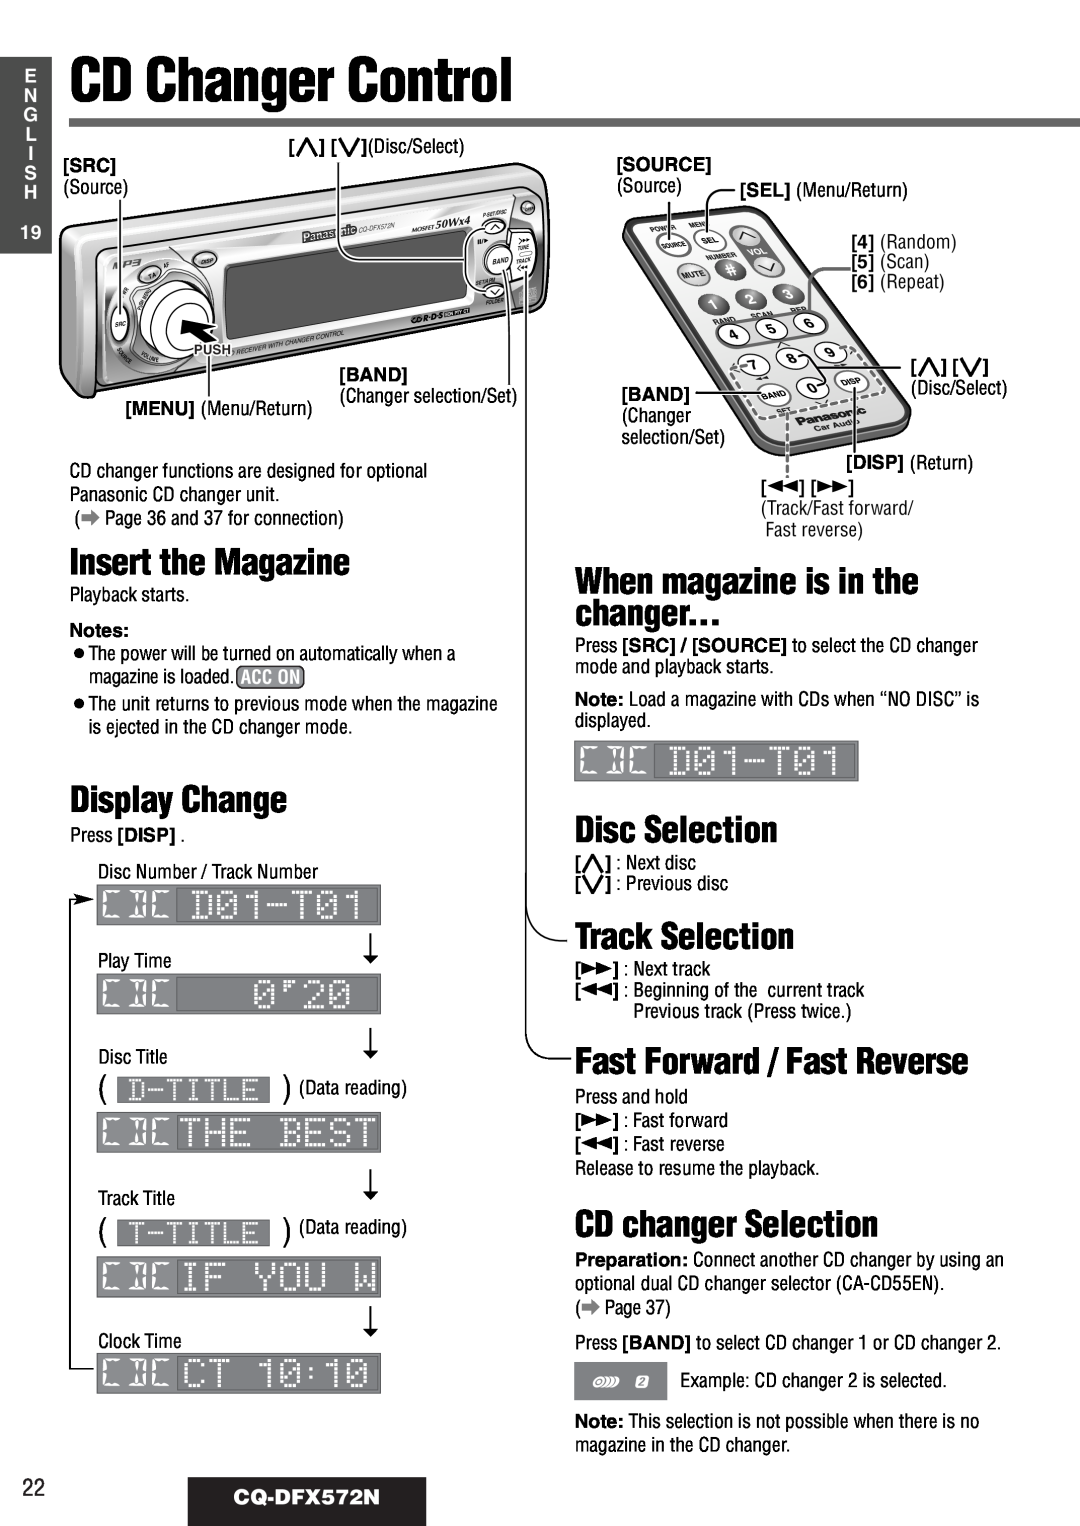 Panasonic CQ-DFX572N Insert the Magazine, When magazine is in the changer, Disc Selection, Fast Forward / Fast Reverse 